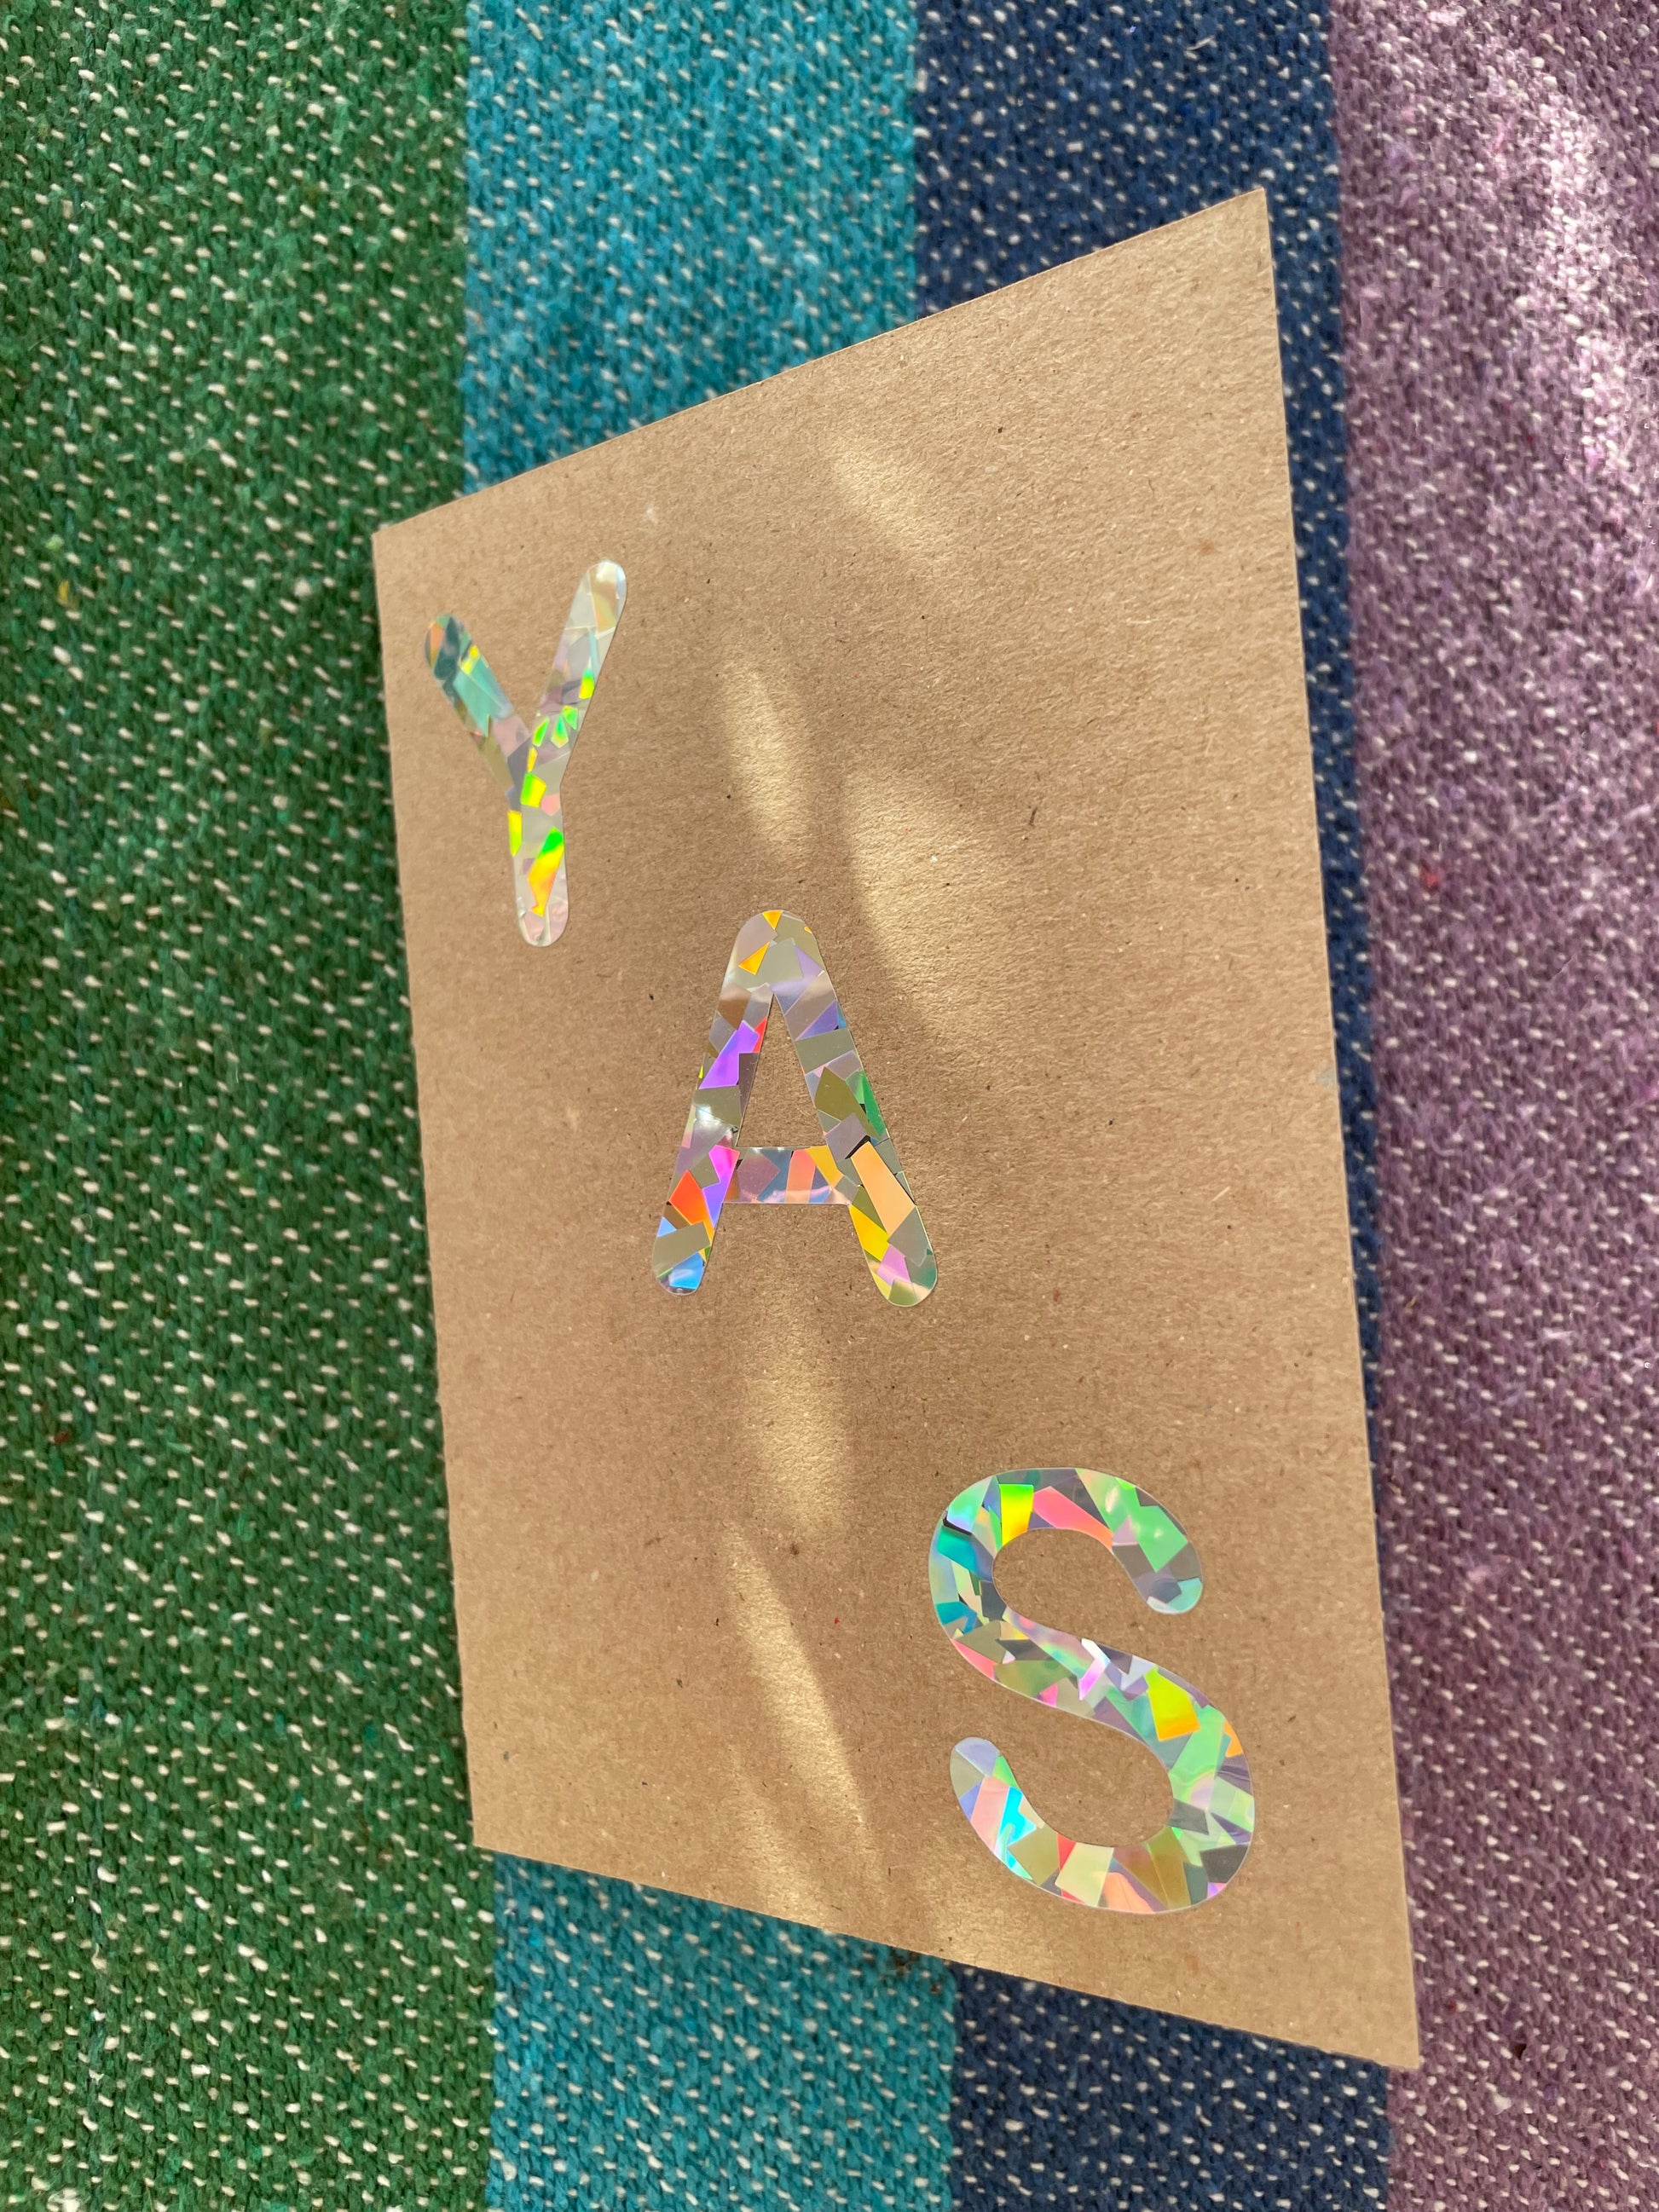 YAS HOLOGRAPHIC Greeting Card handcrafted with rainbow love on recycled Kraft card made locally in Australia